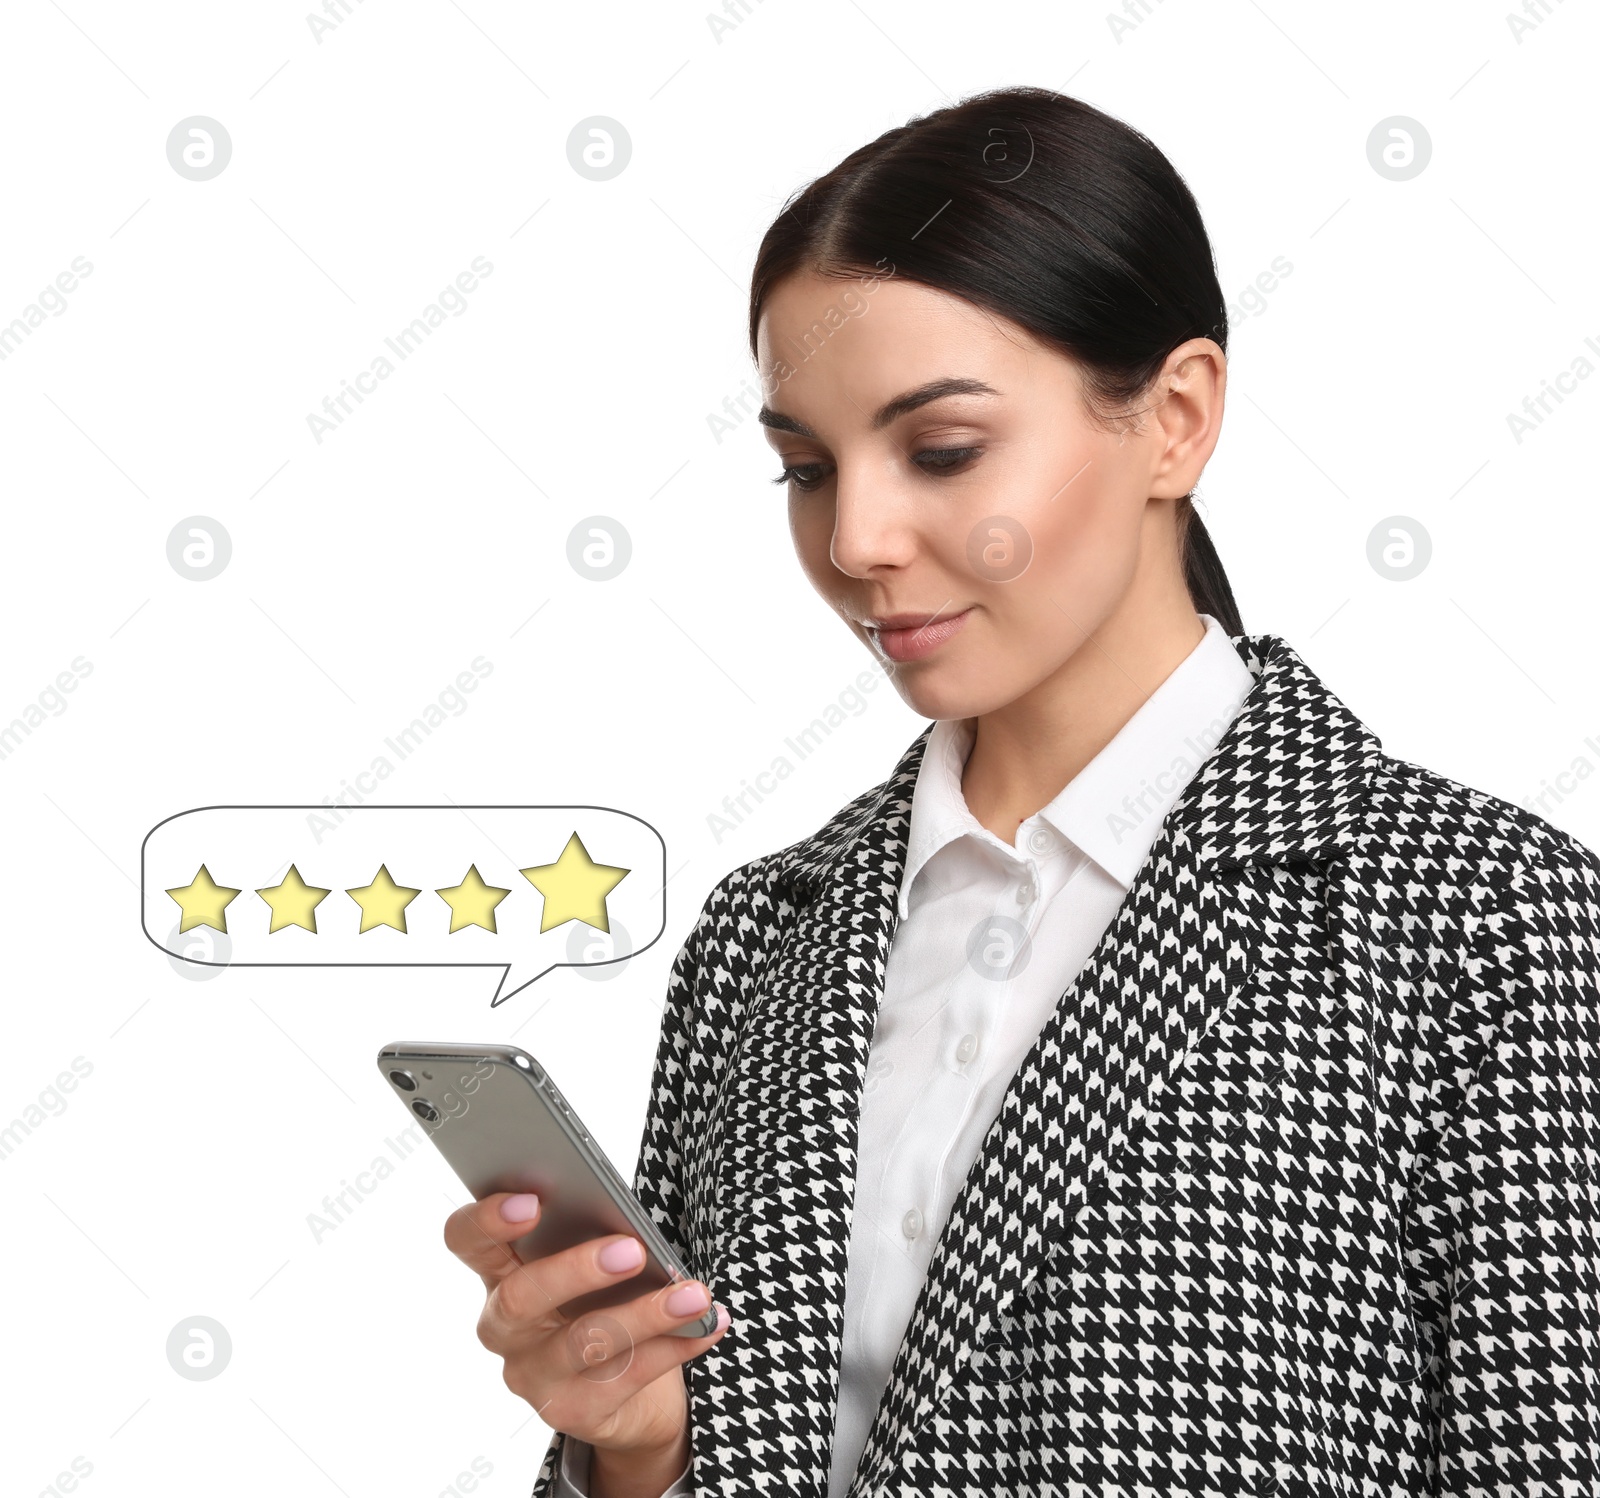 Image of Woman leaving review online via smartphone on white background. Five stars over gadget